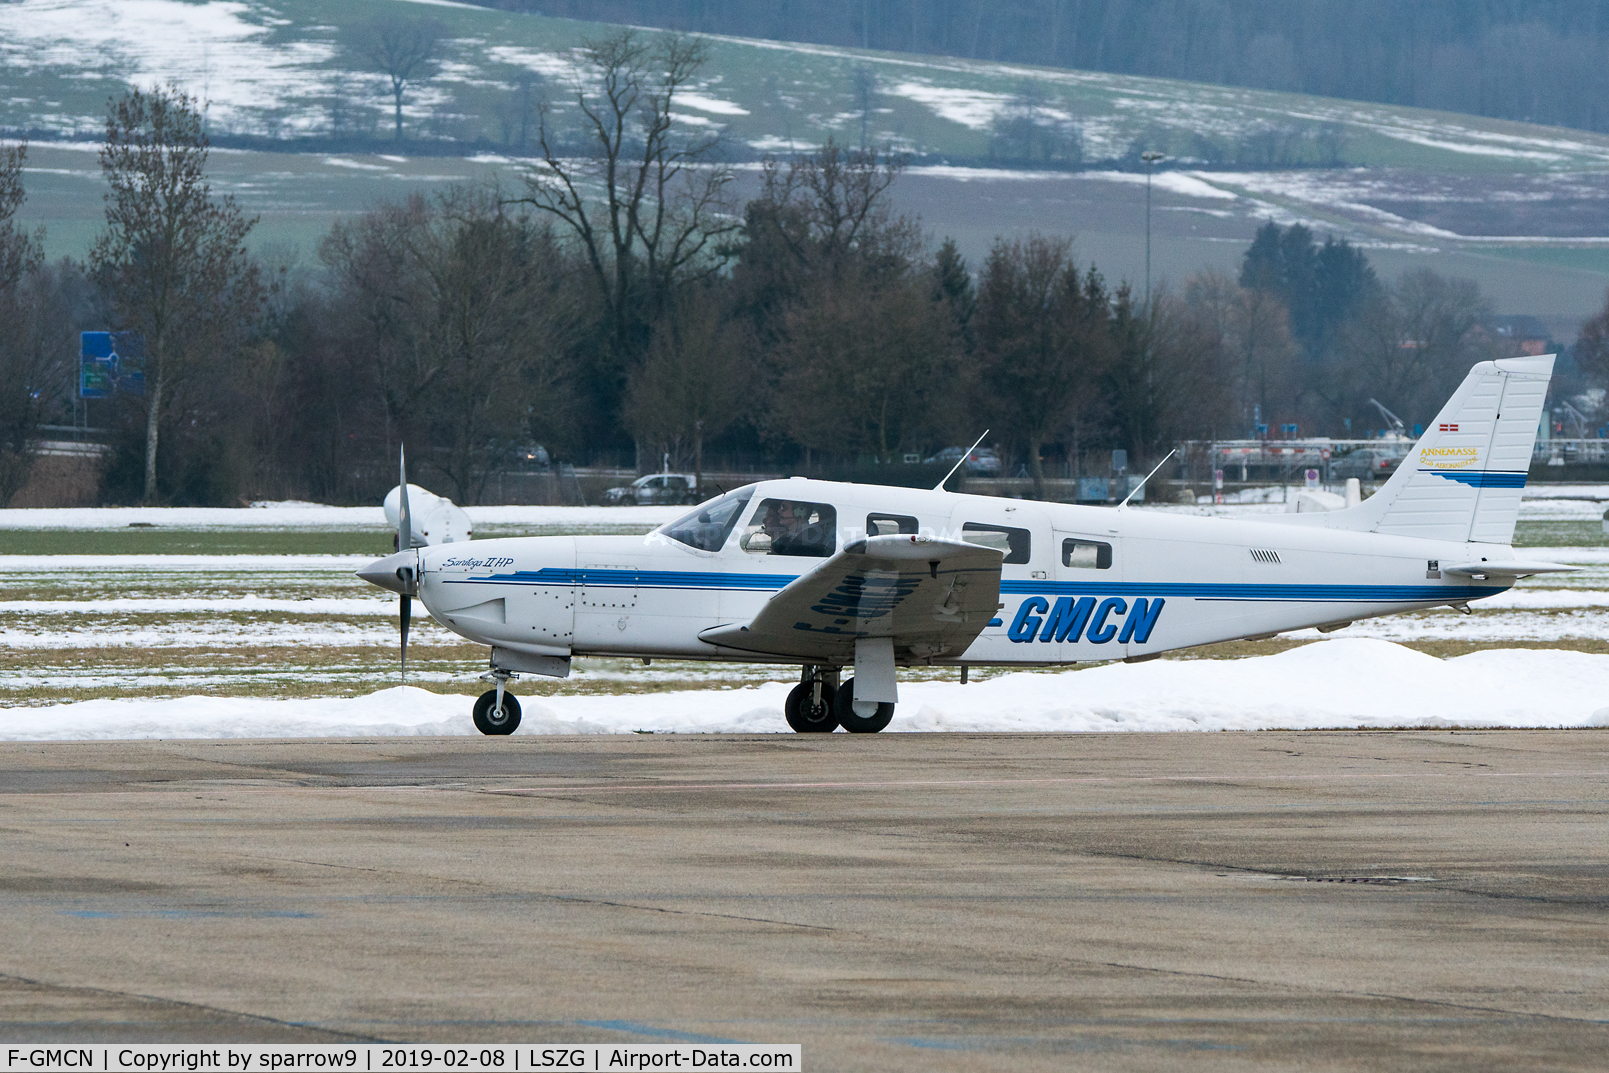 F-GMCN, 1993 Piper PA-32R-301 Saratoga SP C/N 3213049, Five years ago we had still some snow at that time at Grenchen.